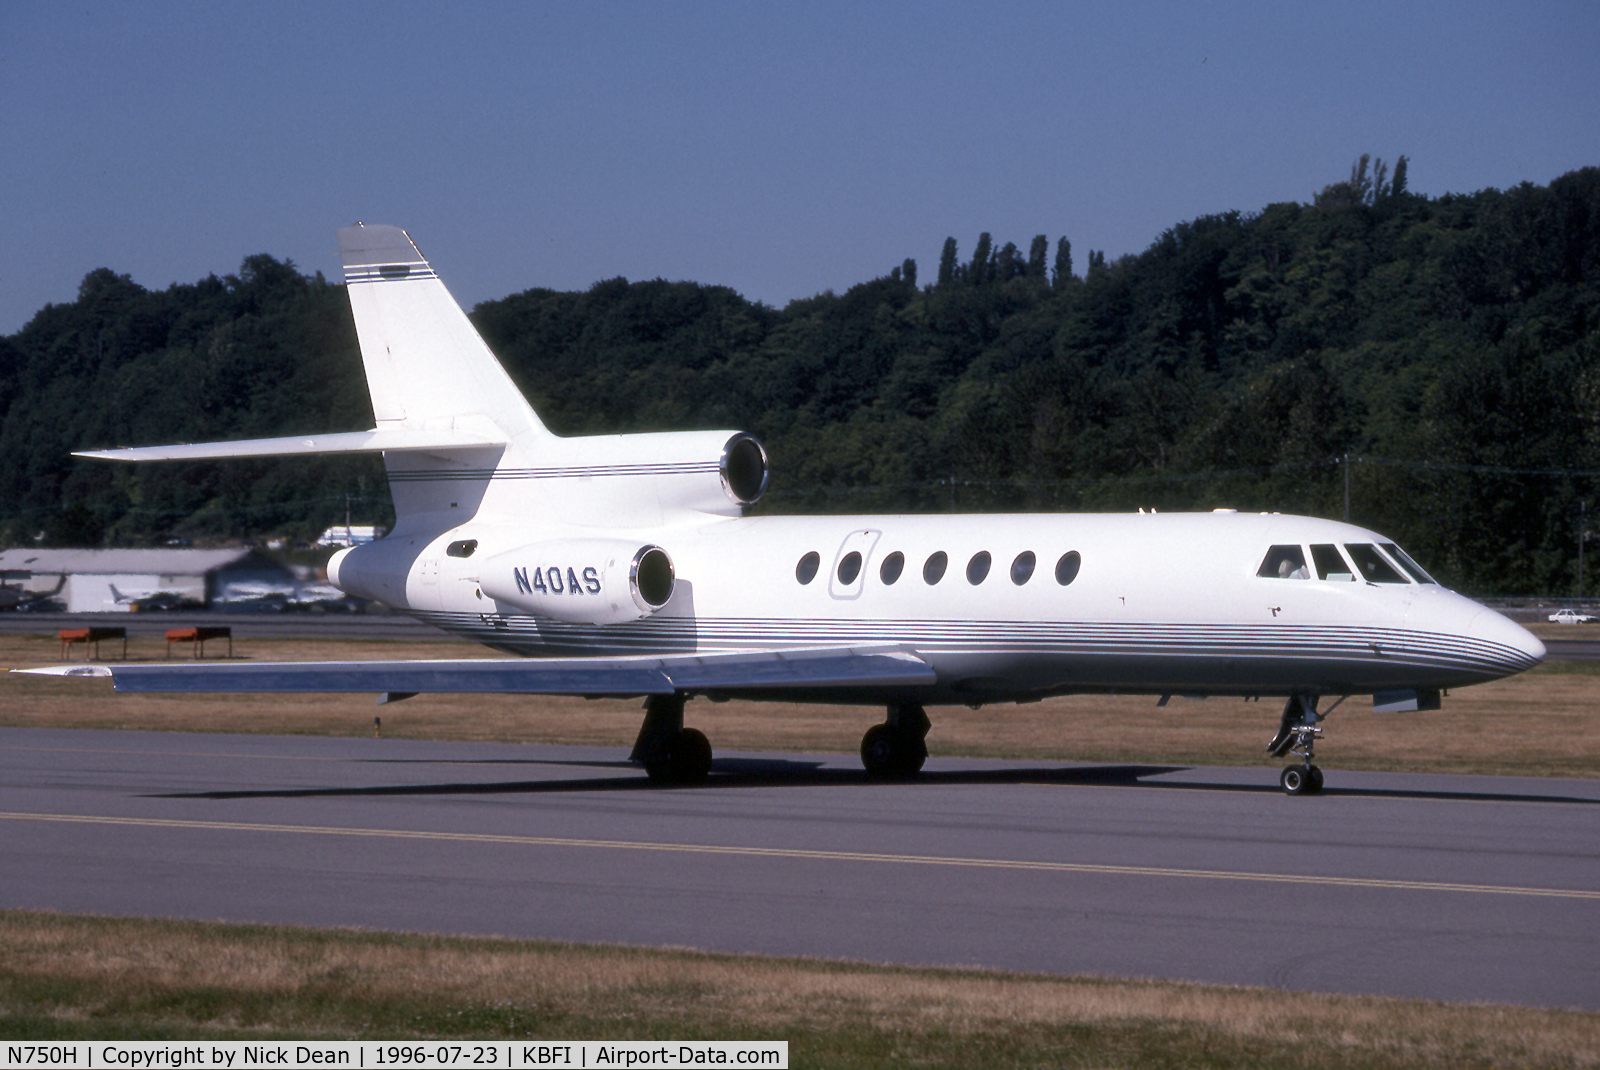 N750H, 1986 Dassault-Breguet Falcon 50 C/N 171, Seen here as N40AS this airframe is currently registered N750H as posted